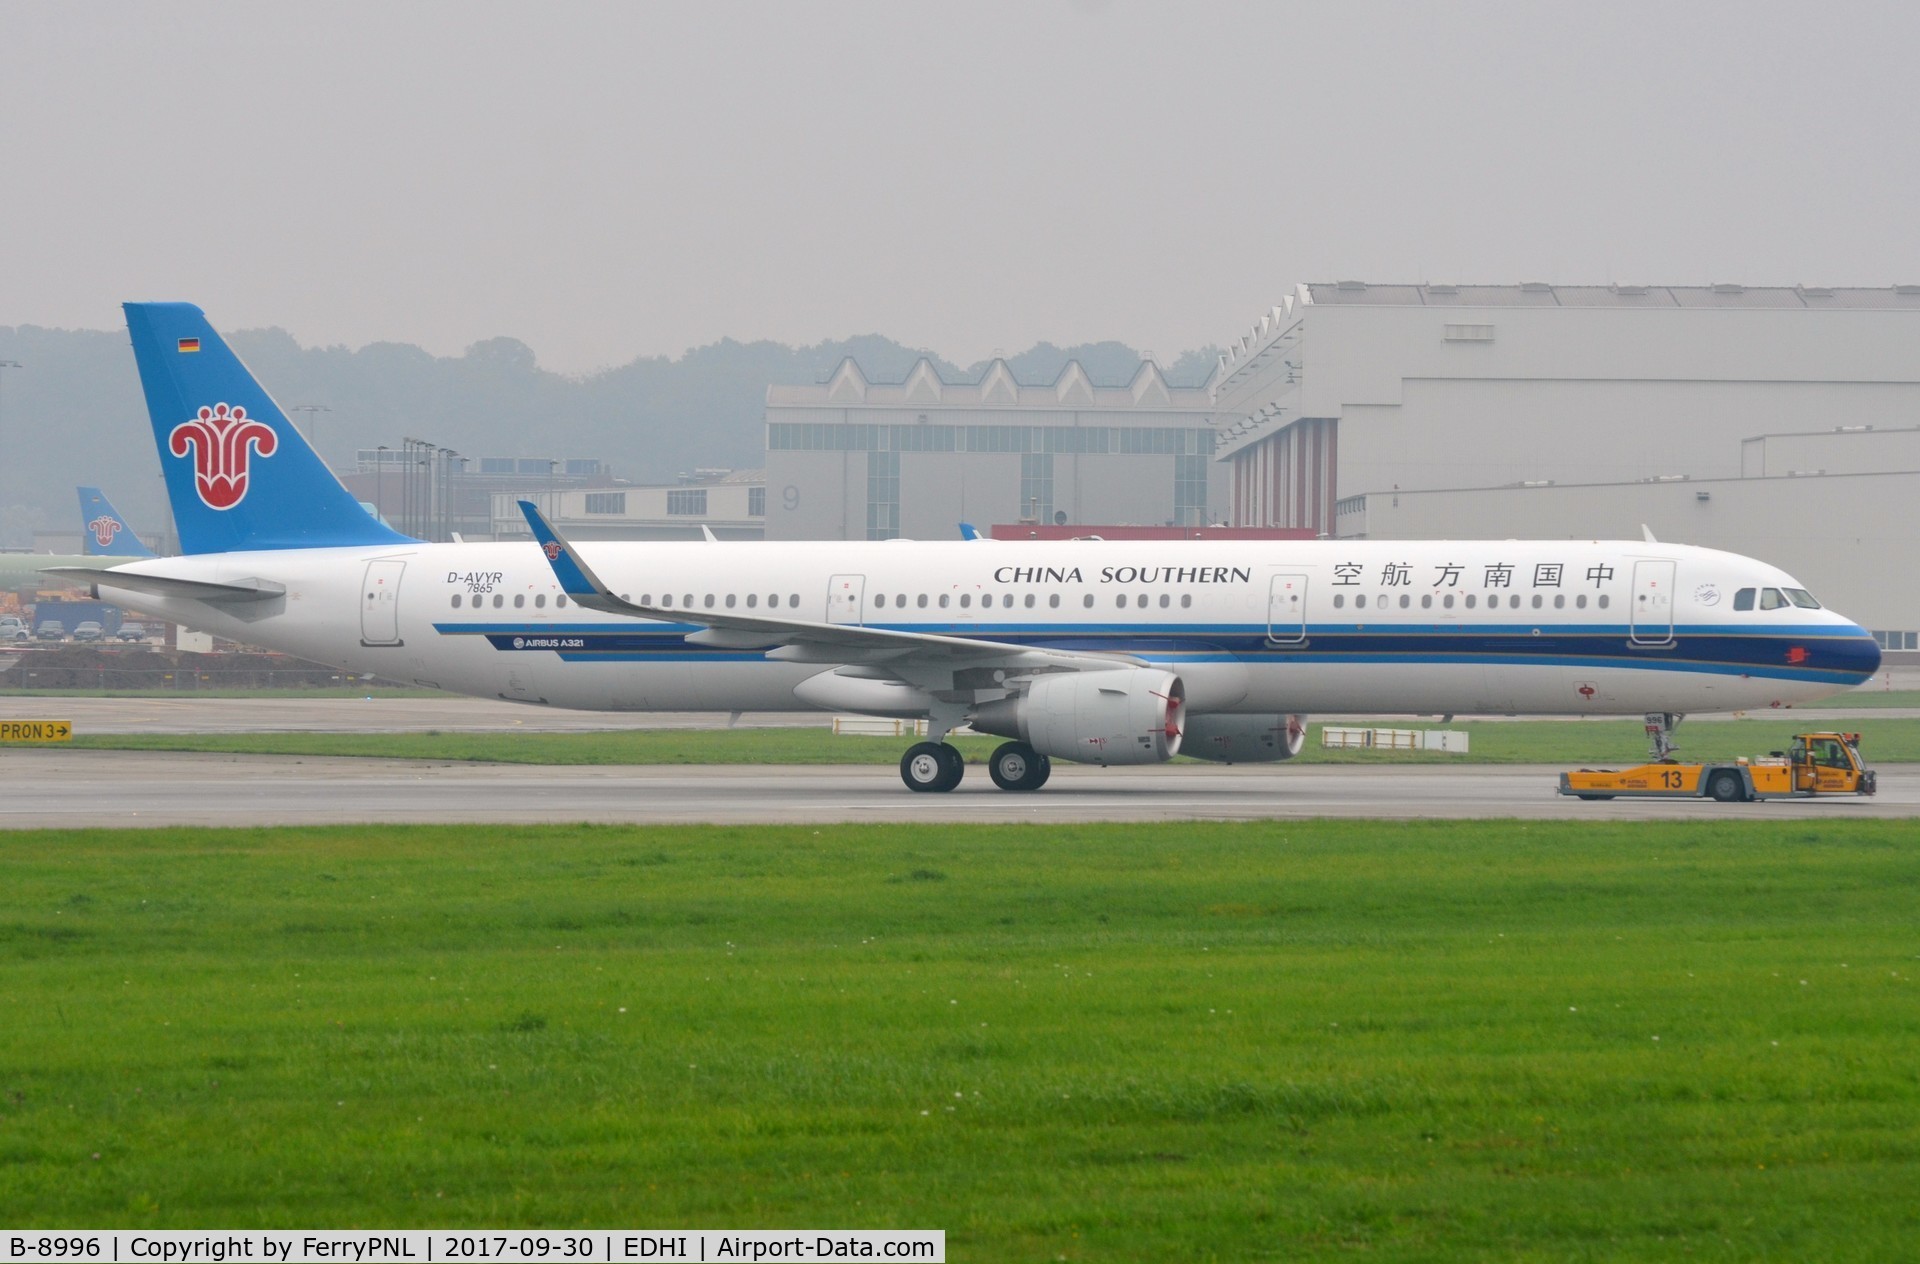 B-8996, 2017 Airbus A321-211 C/N 7865, China Southern A321 under tow in XFW with test reg D-AVYR prior delivery in XFW